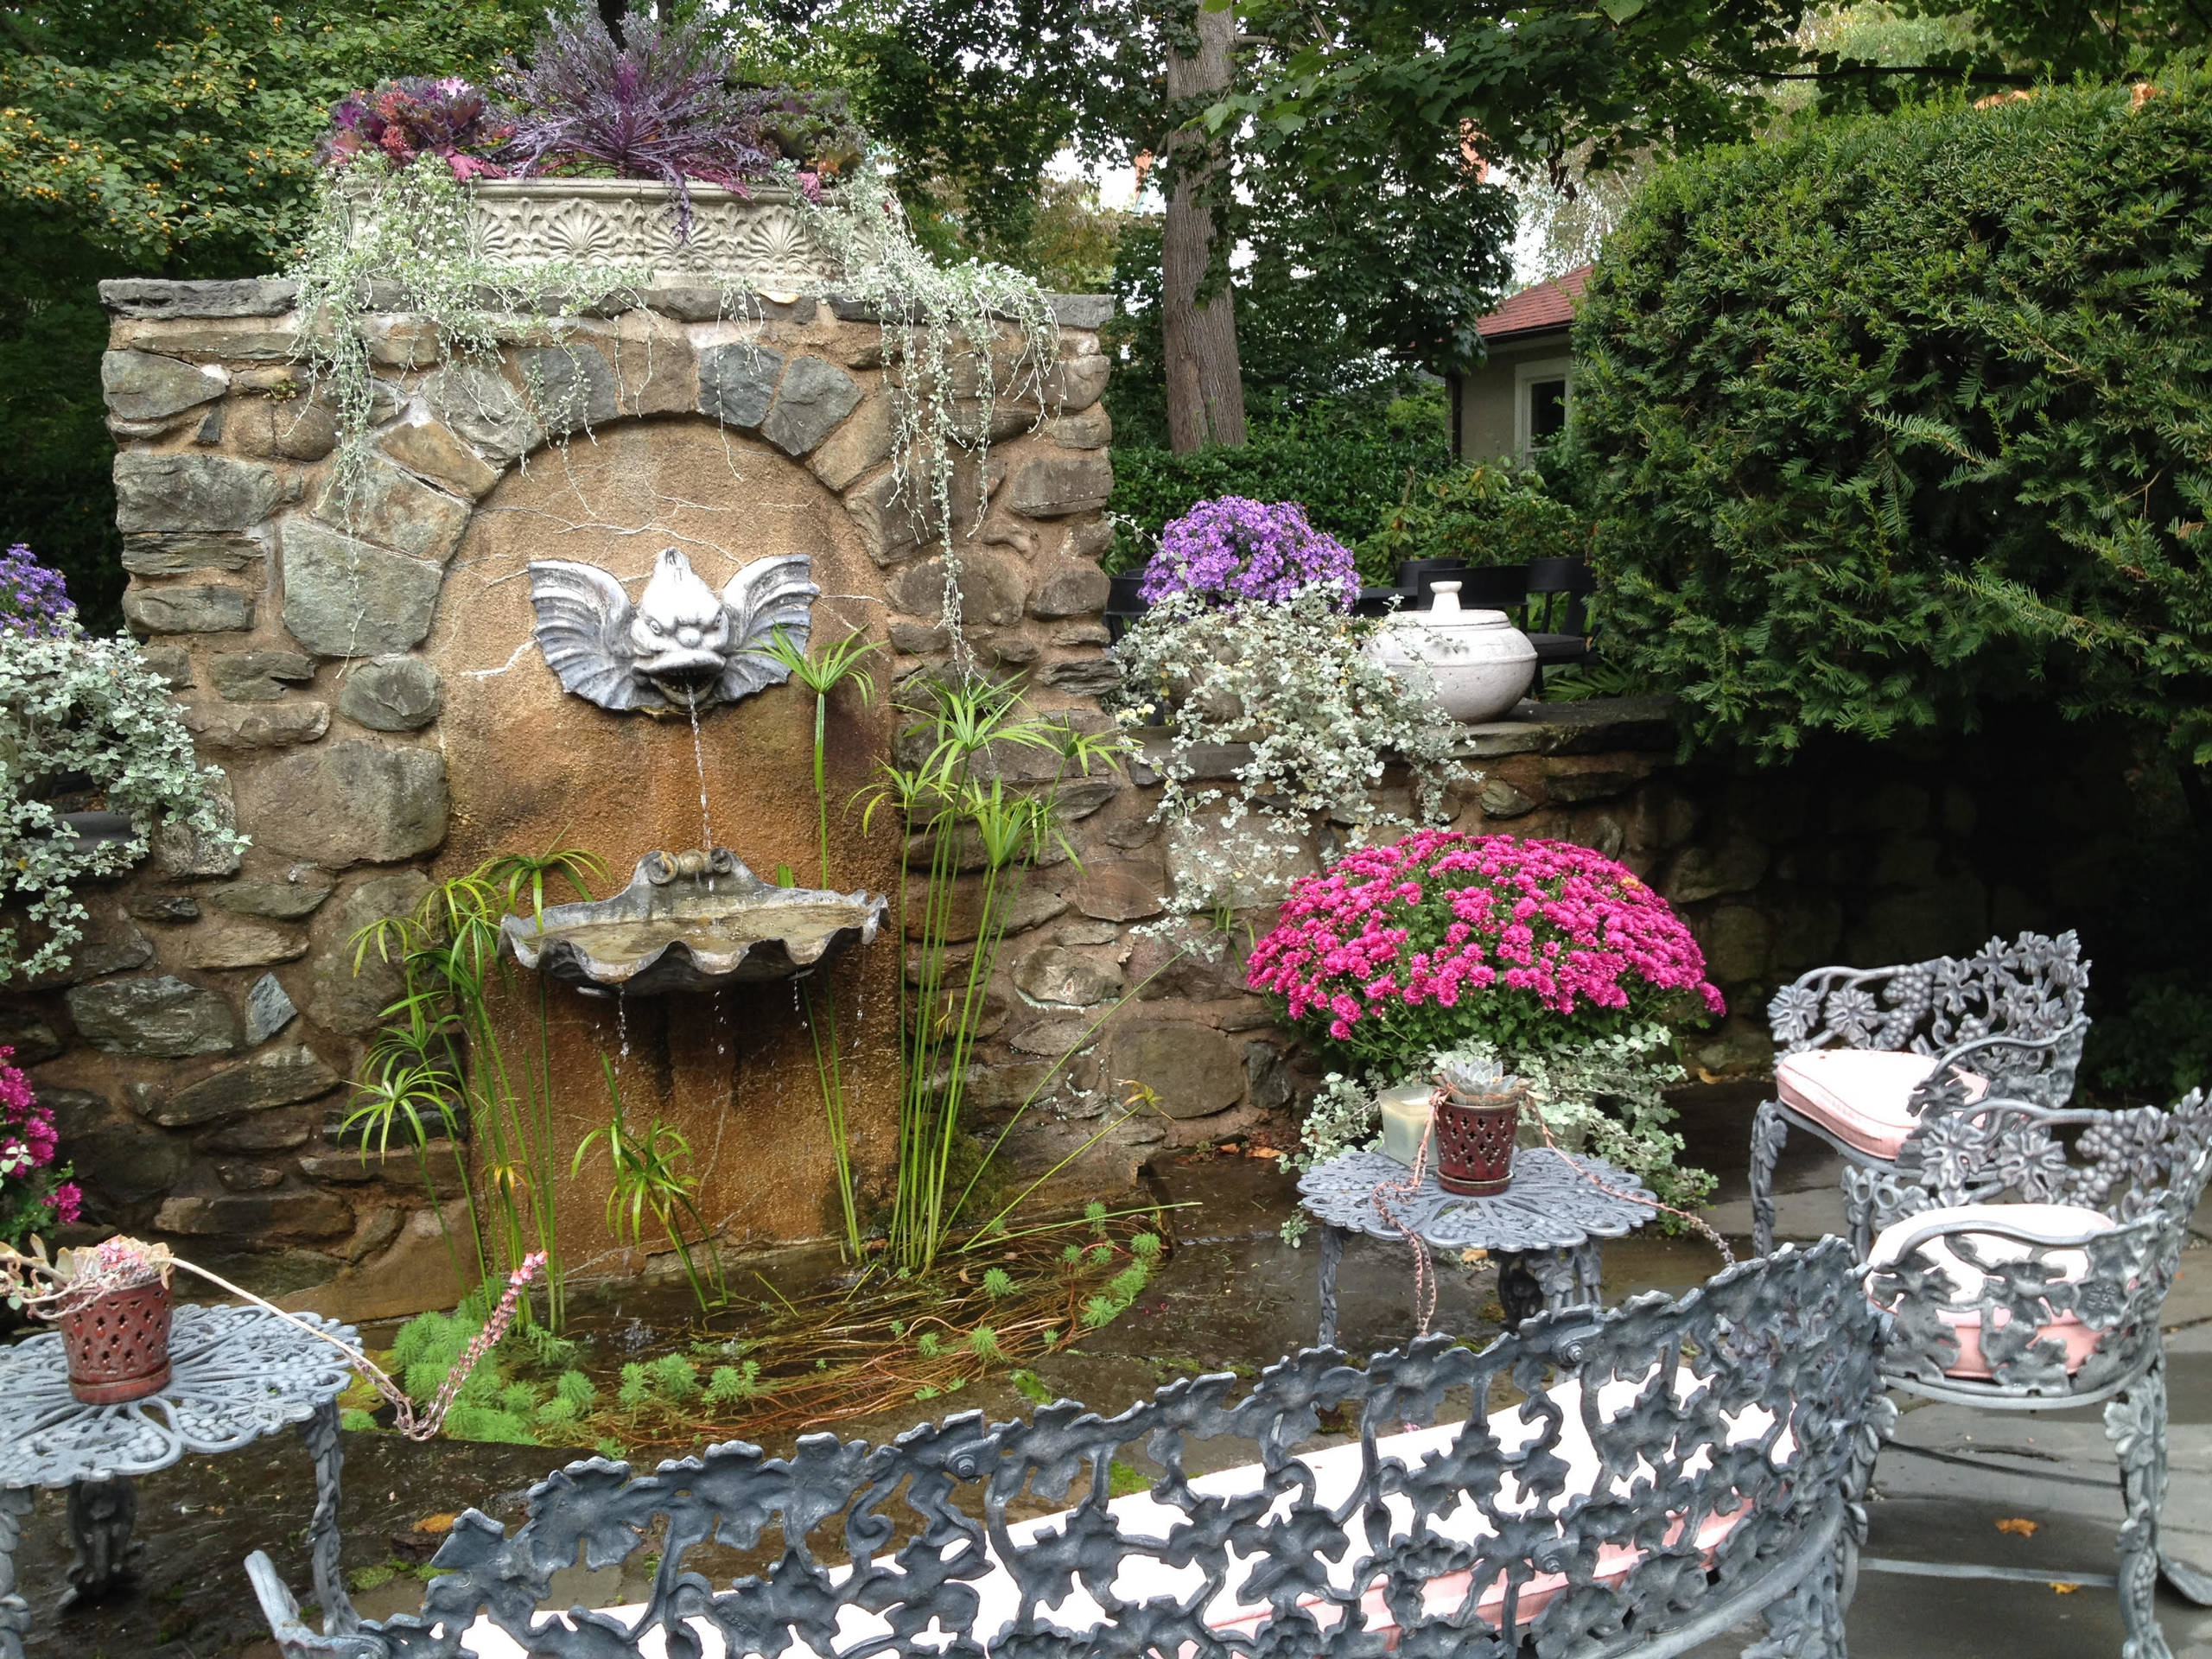 Water Features & Hardscape's